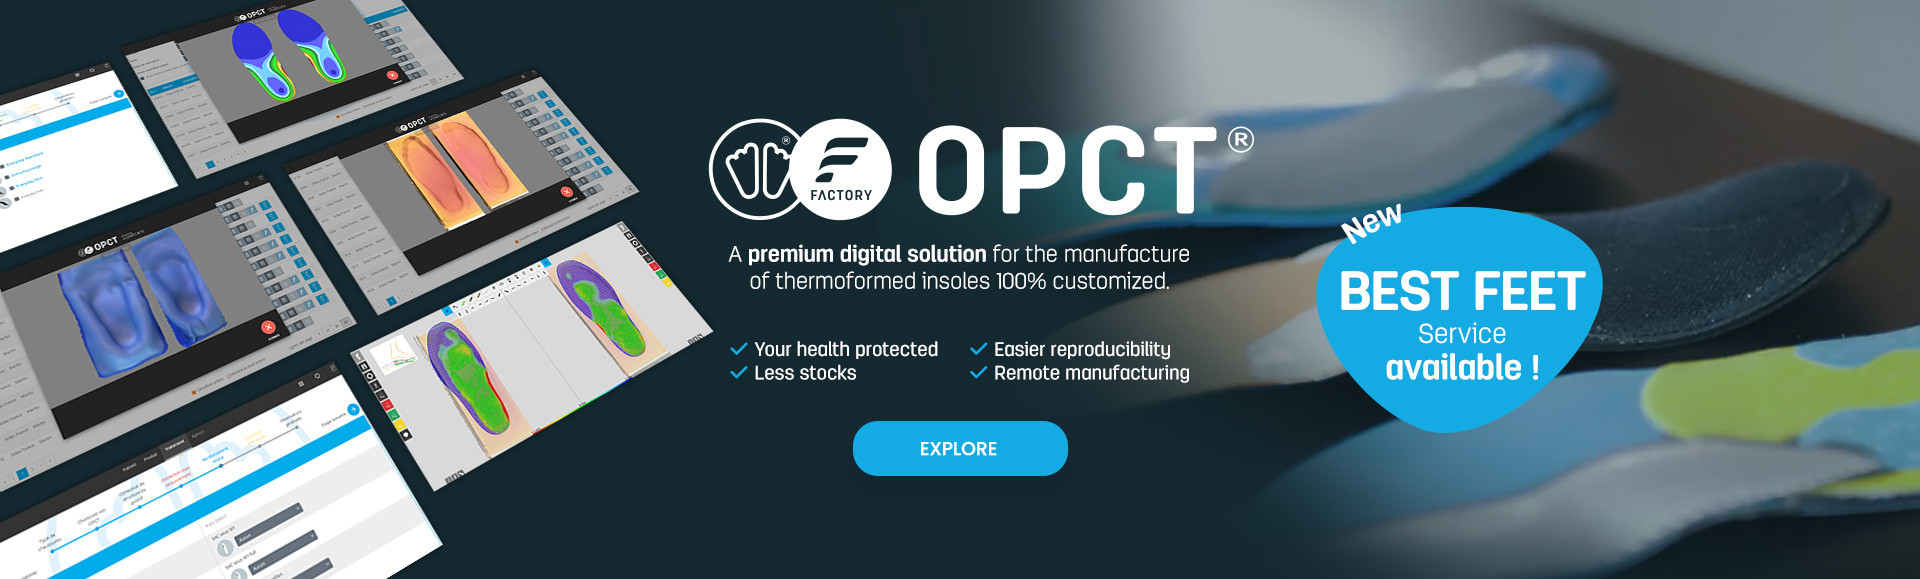 Discover the OPCT Factory !